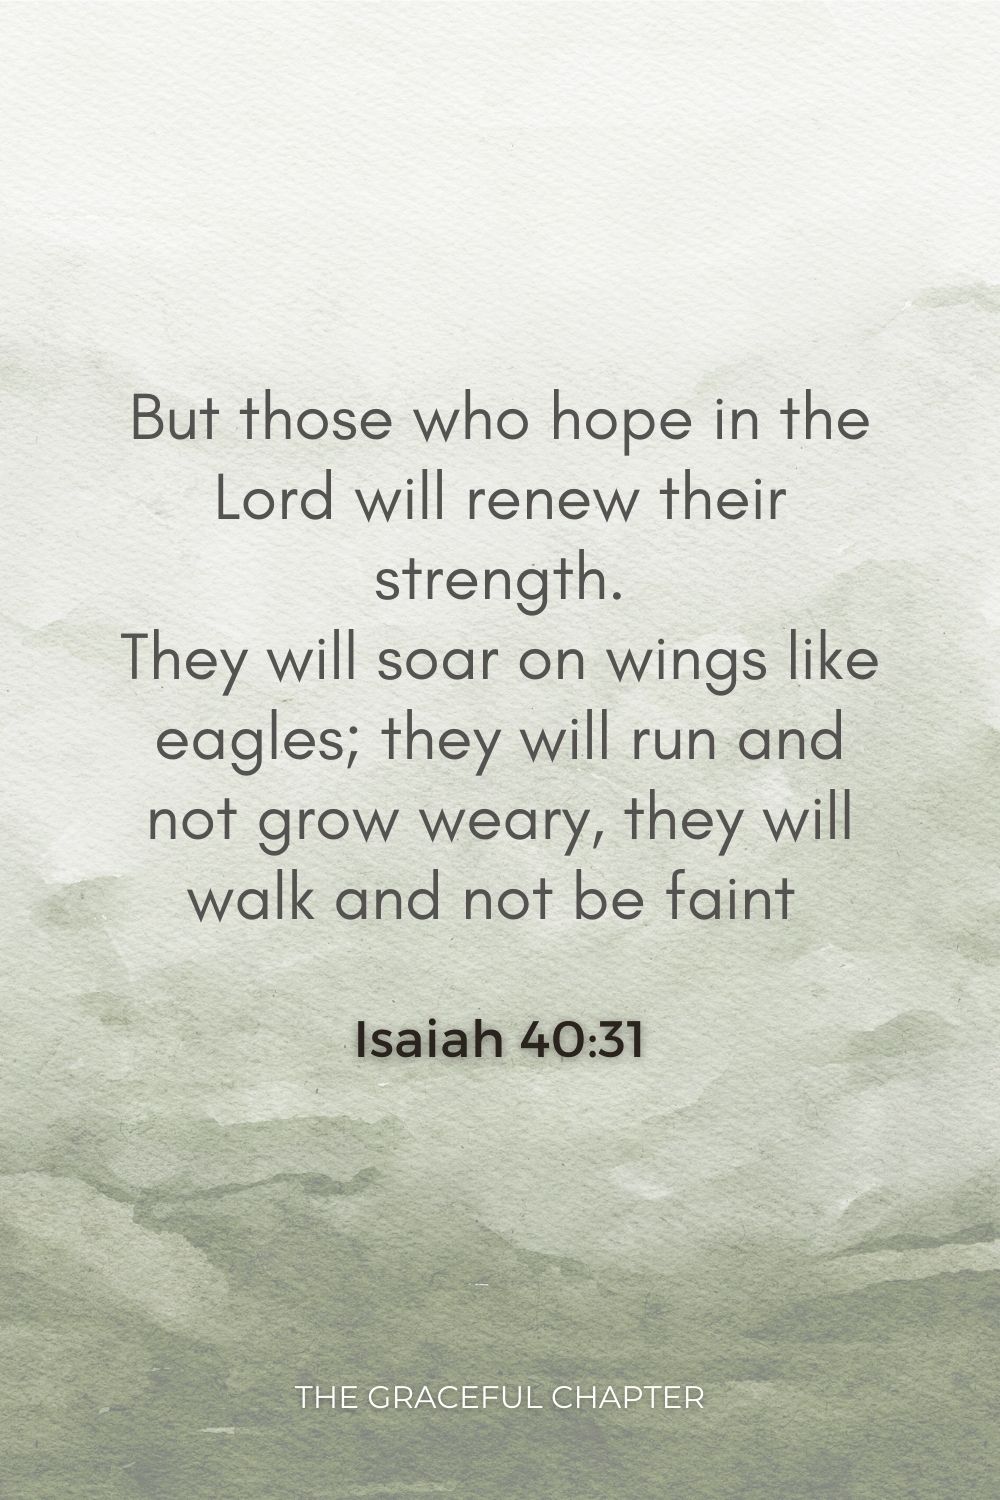 But those who hope in the Lord will renew their strength. They will soar on wings like eagles; they will run and not grow weary, they will walk and not be faint  Isaiah 40:31